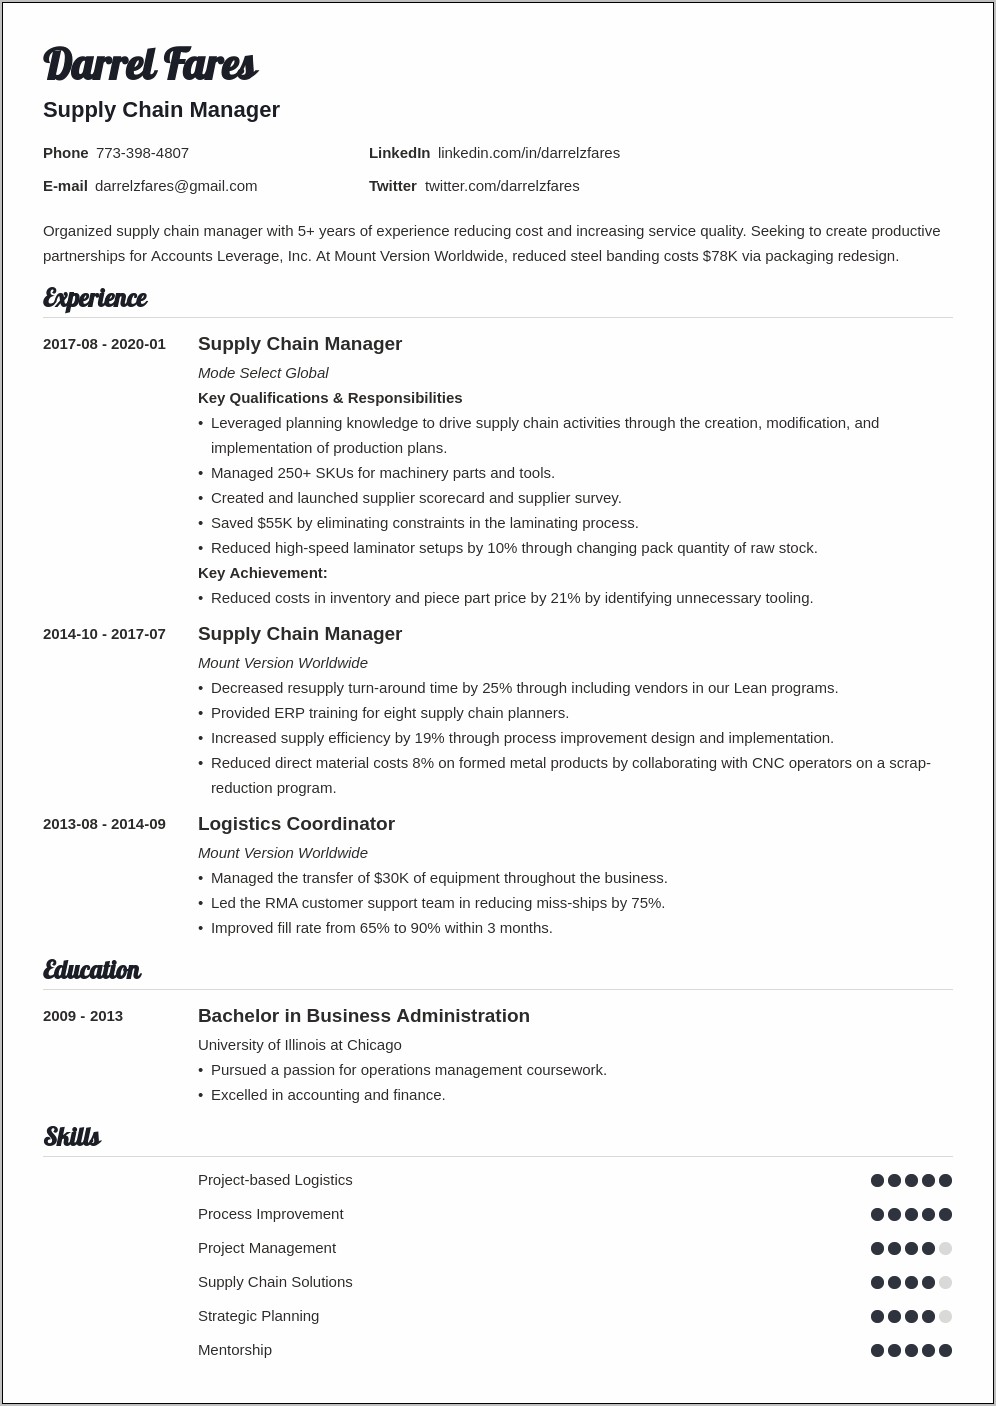 Resume Supply Chain Management Professional